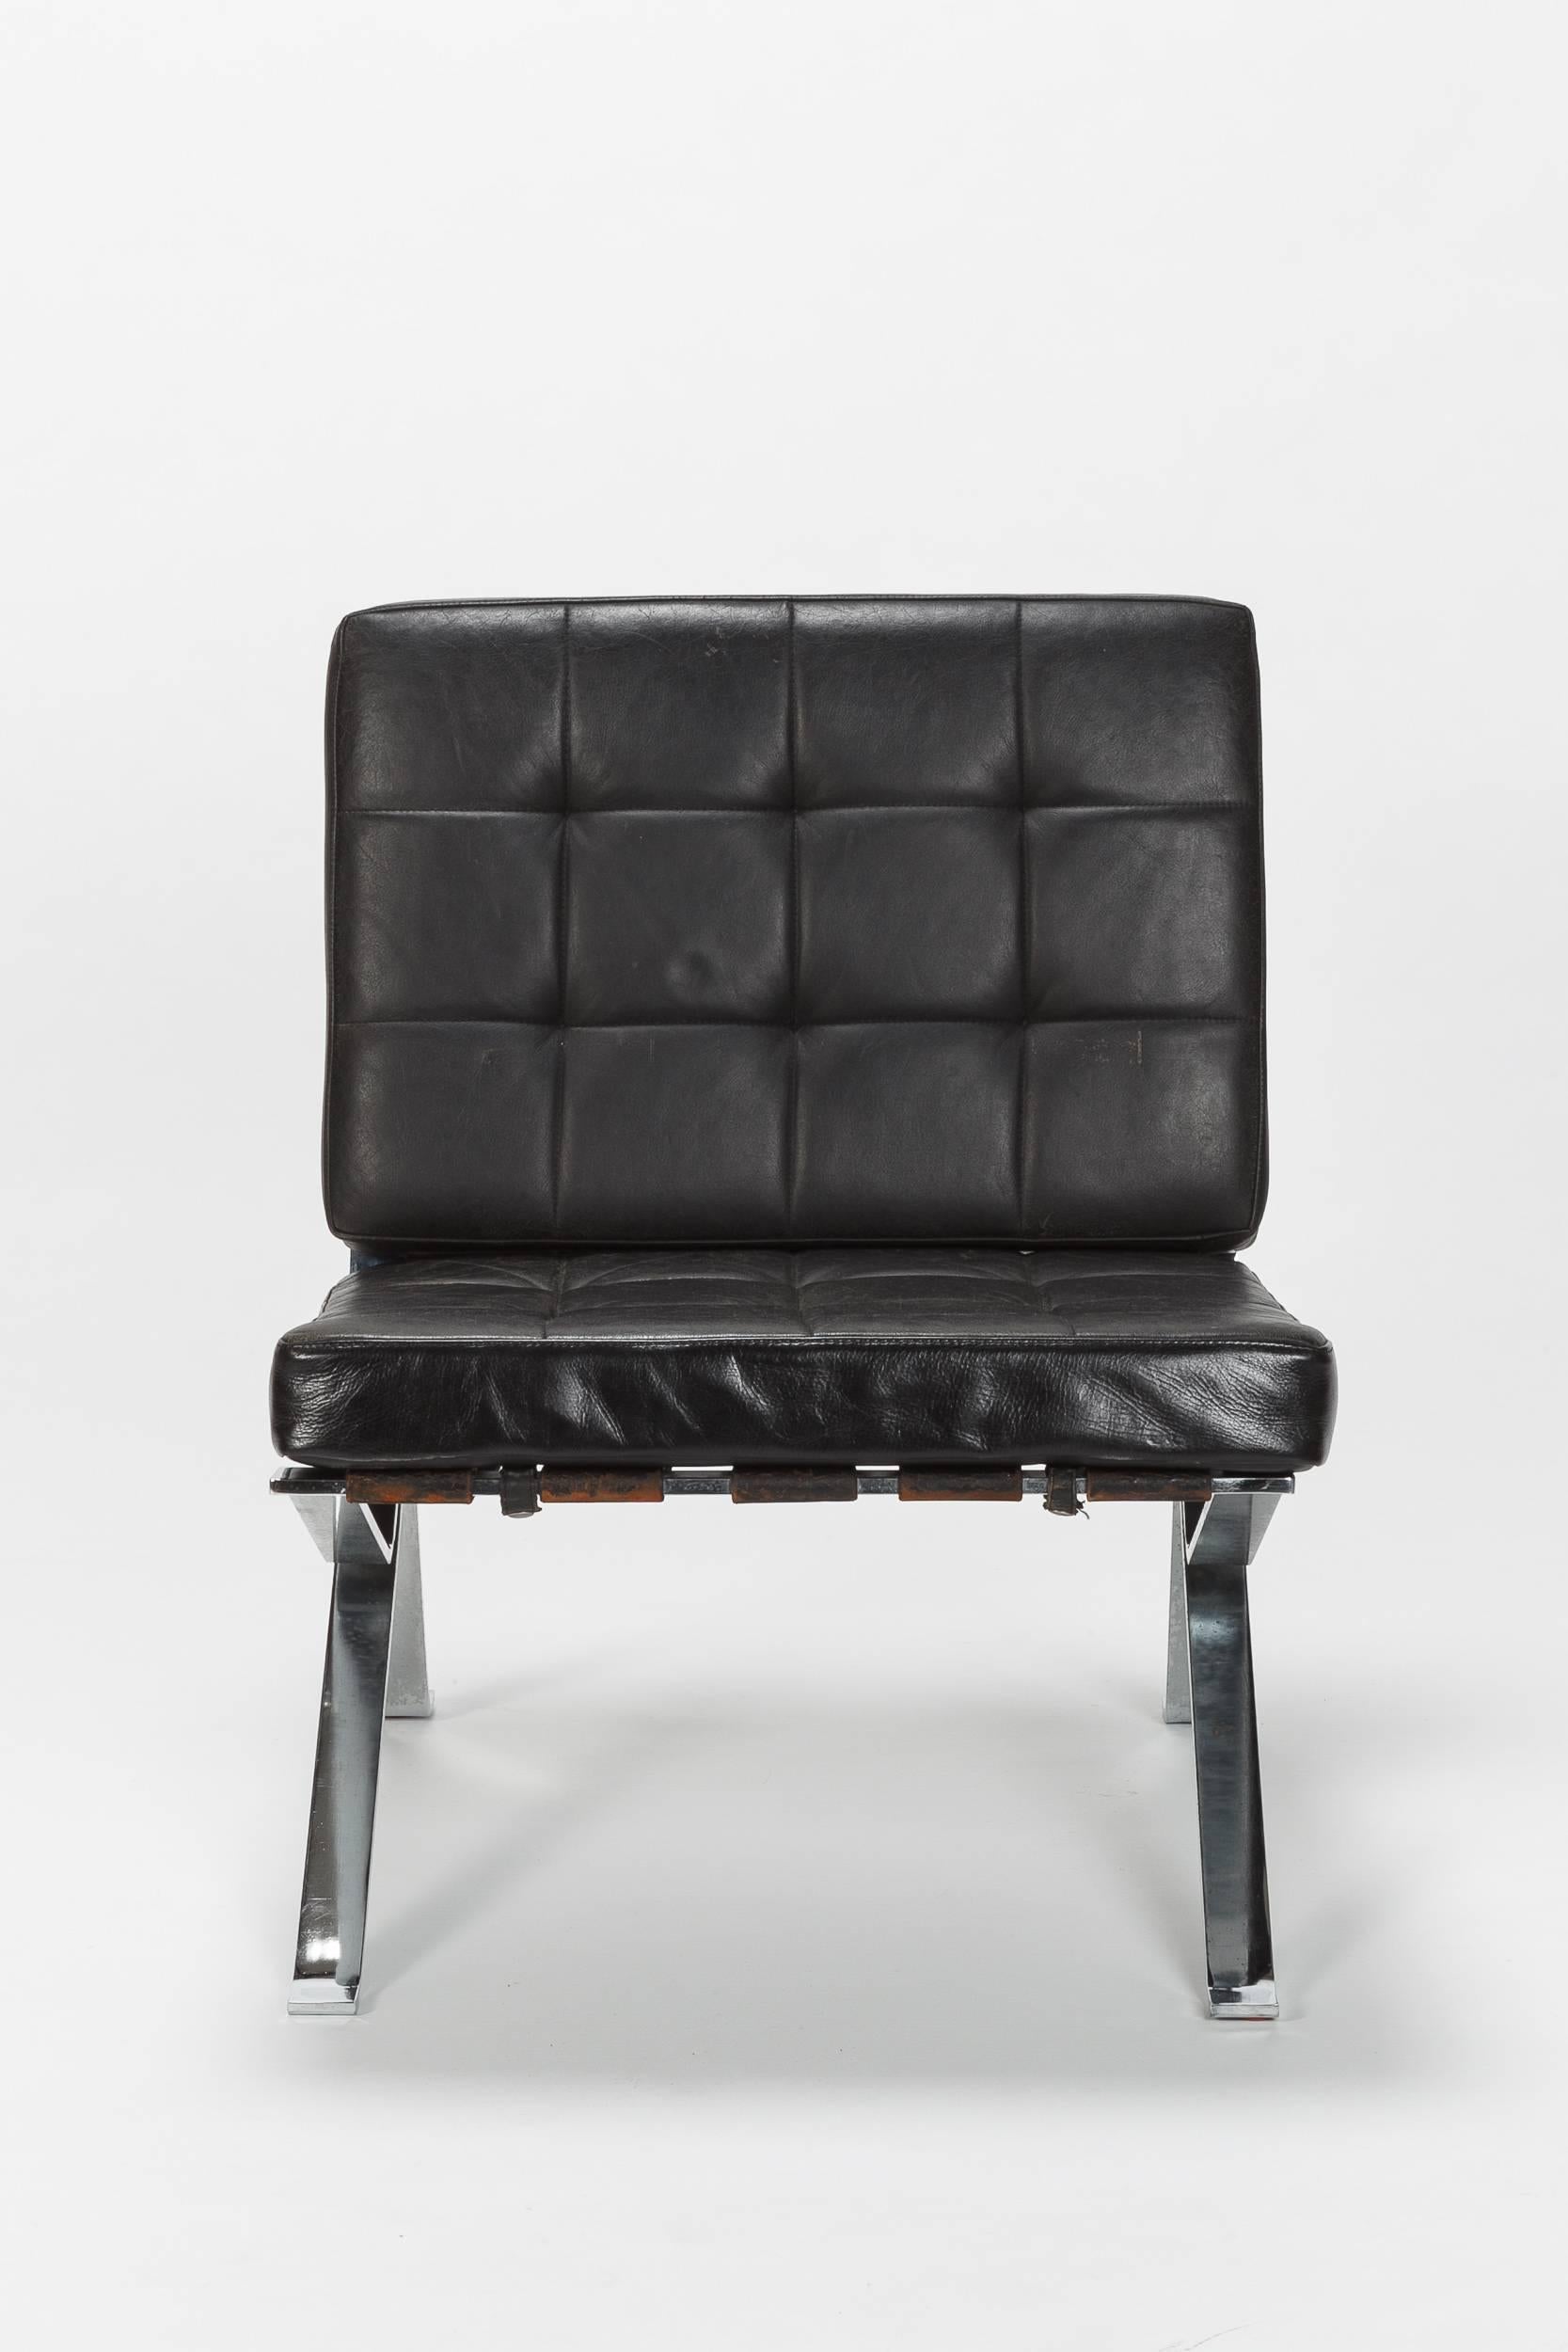 Walter Frey lounge chair from the 1950/60s designed for Stella. Base of stainless steel, black leather straps, loose-fitting cushions made of black leather on the top side, Vinyl fabrics on the bottom side. Slightly refurbished with leather of the